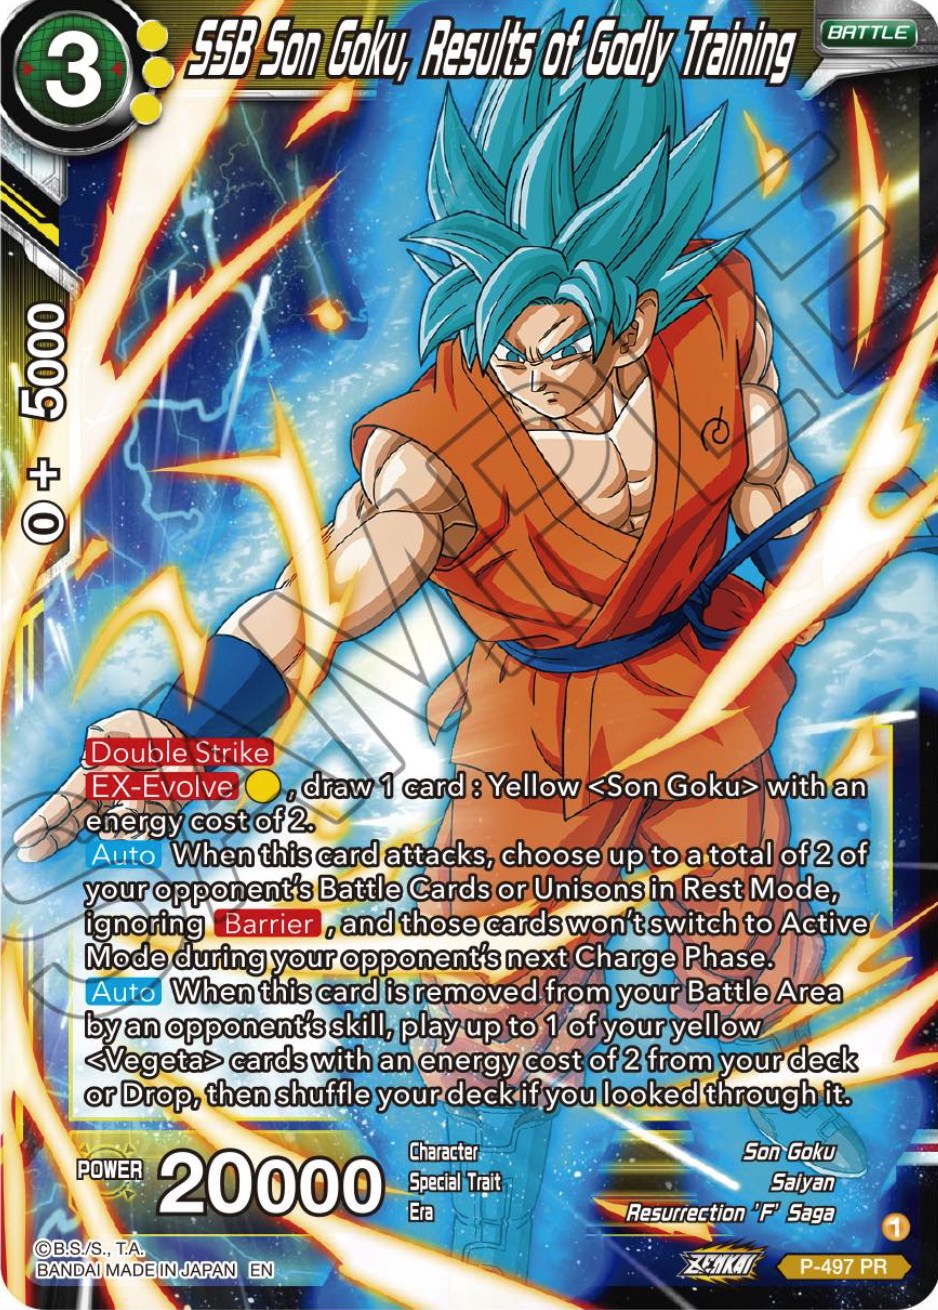 SSB Son Goku, Results of Godly Training (P-497) [Promotion Cards] | North Valley Games